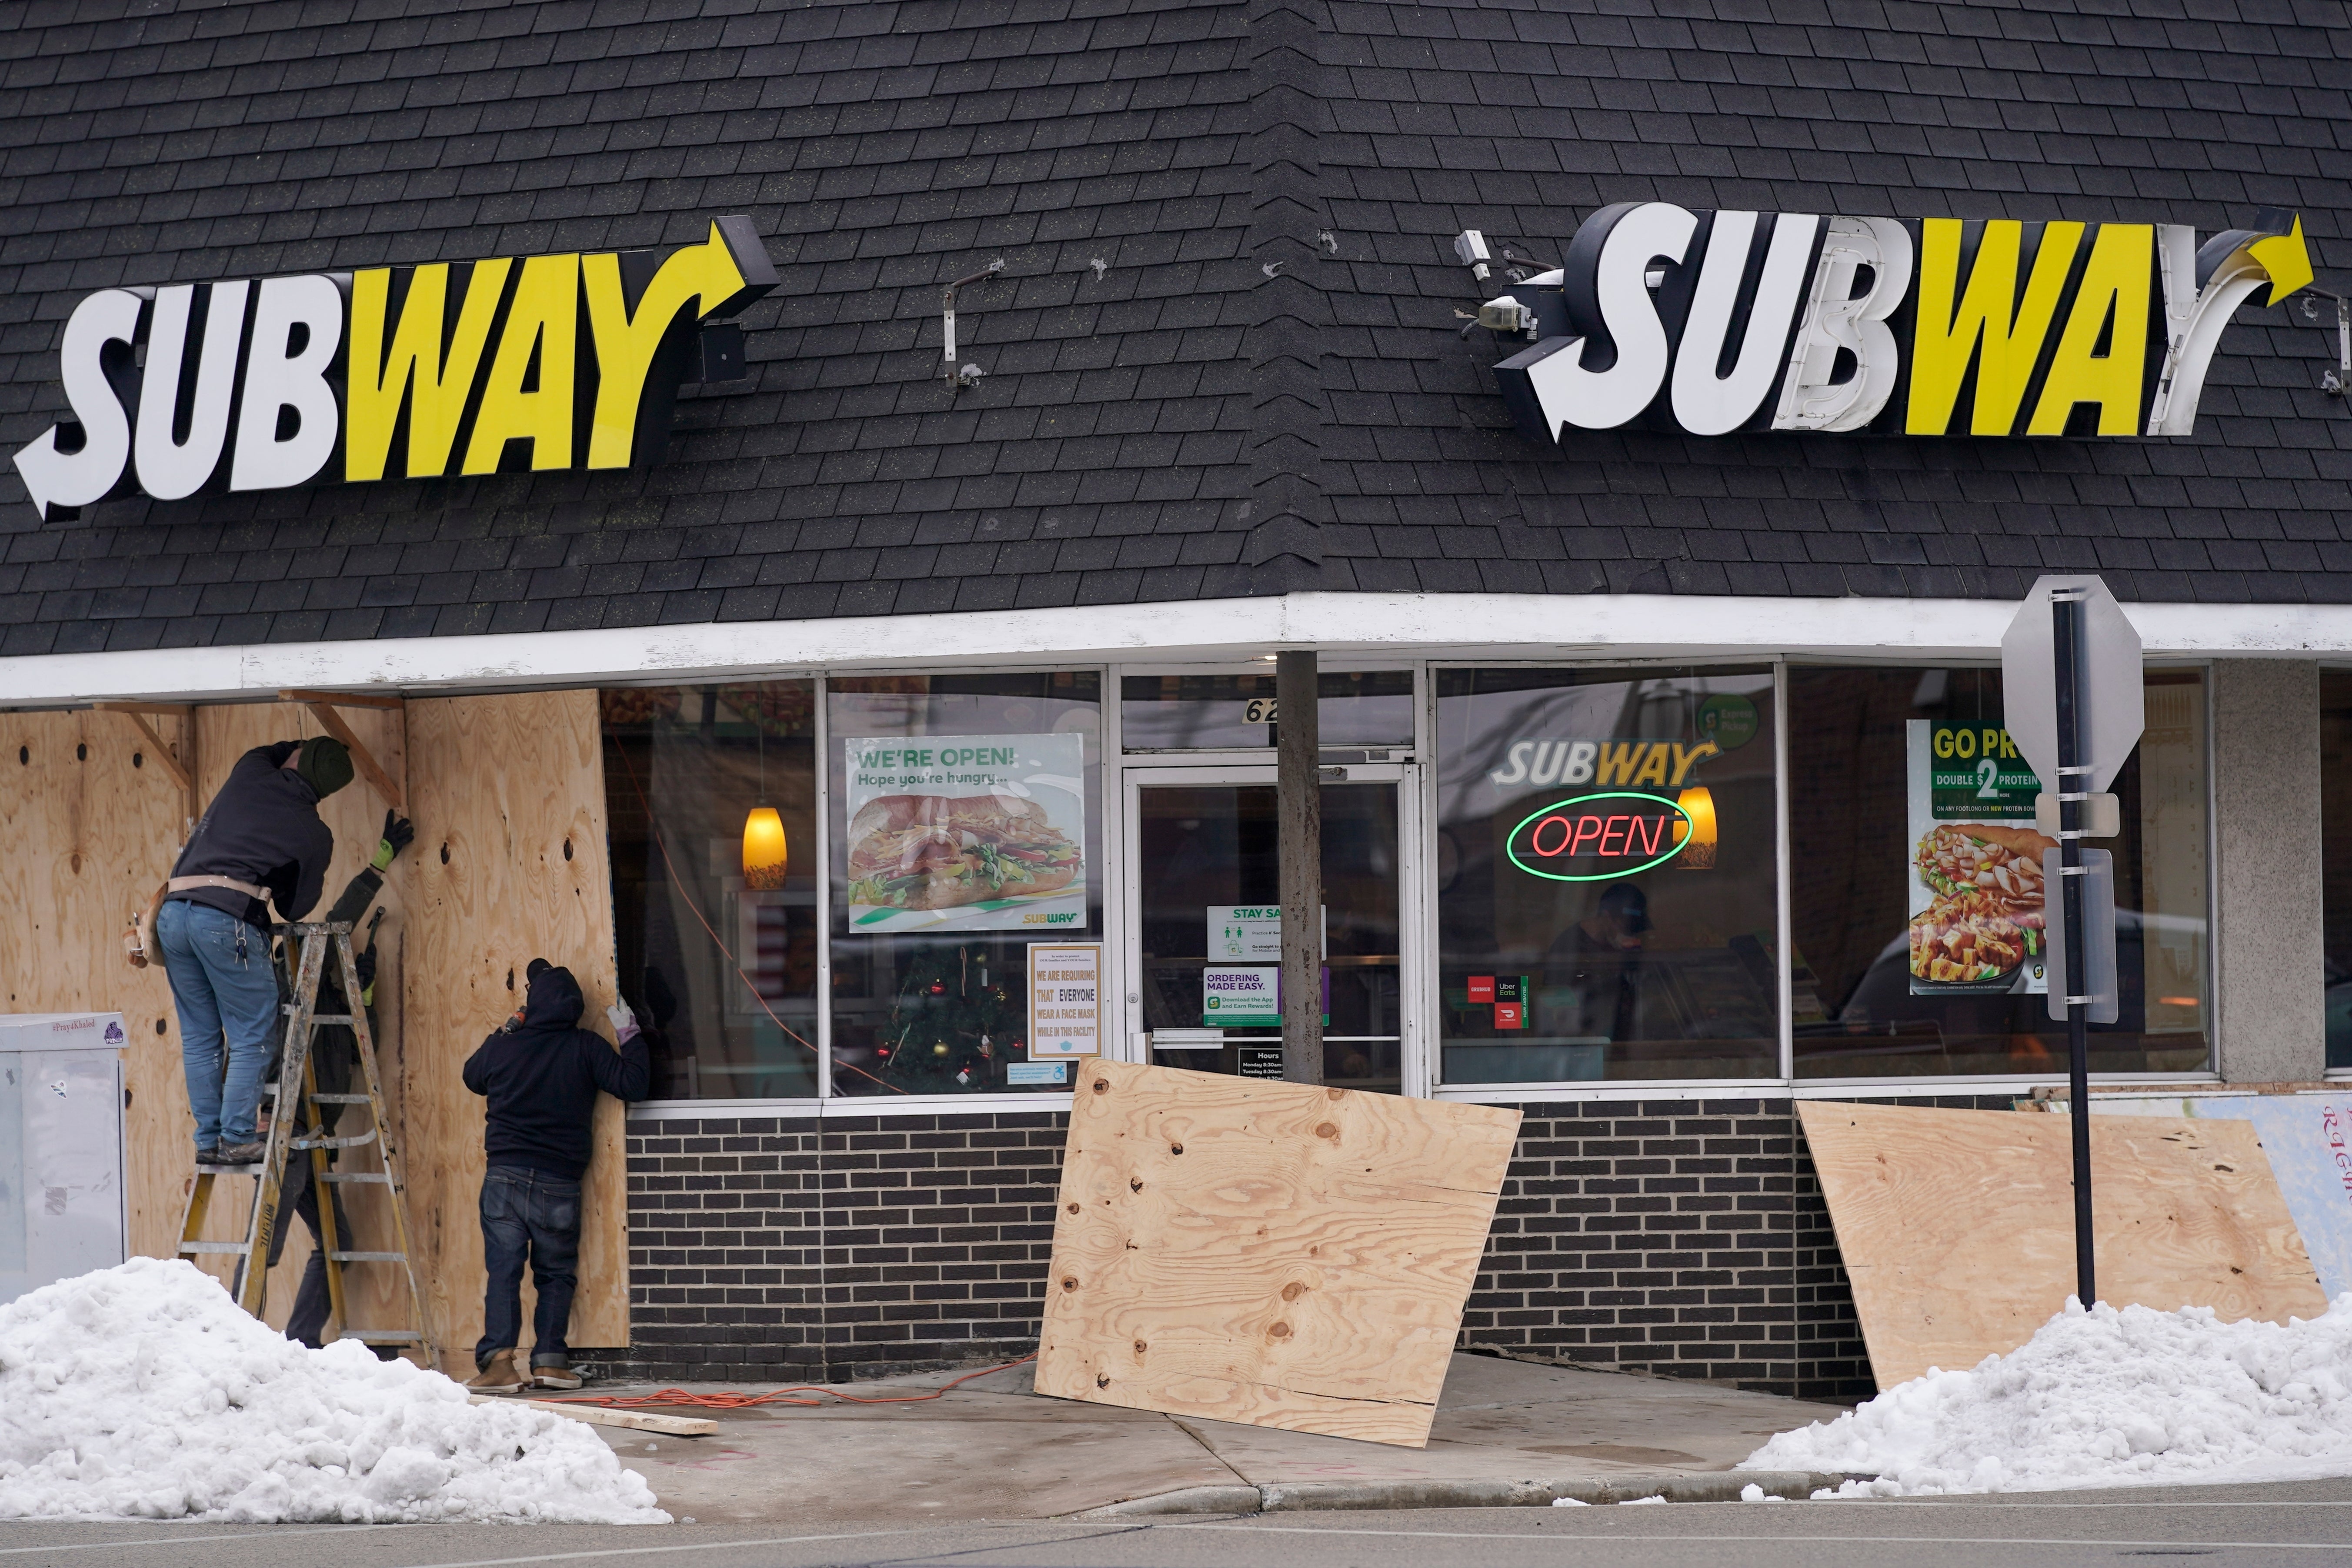 Workers board up windows at a Subway on Tuesday, 5 January in Kenosha, Wisconsin ahead of possible unrest